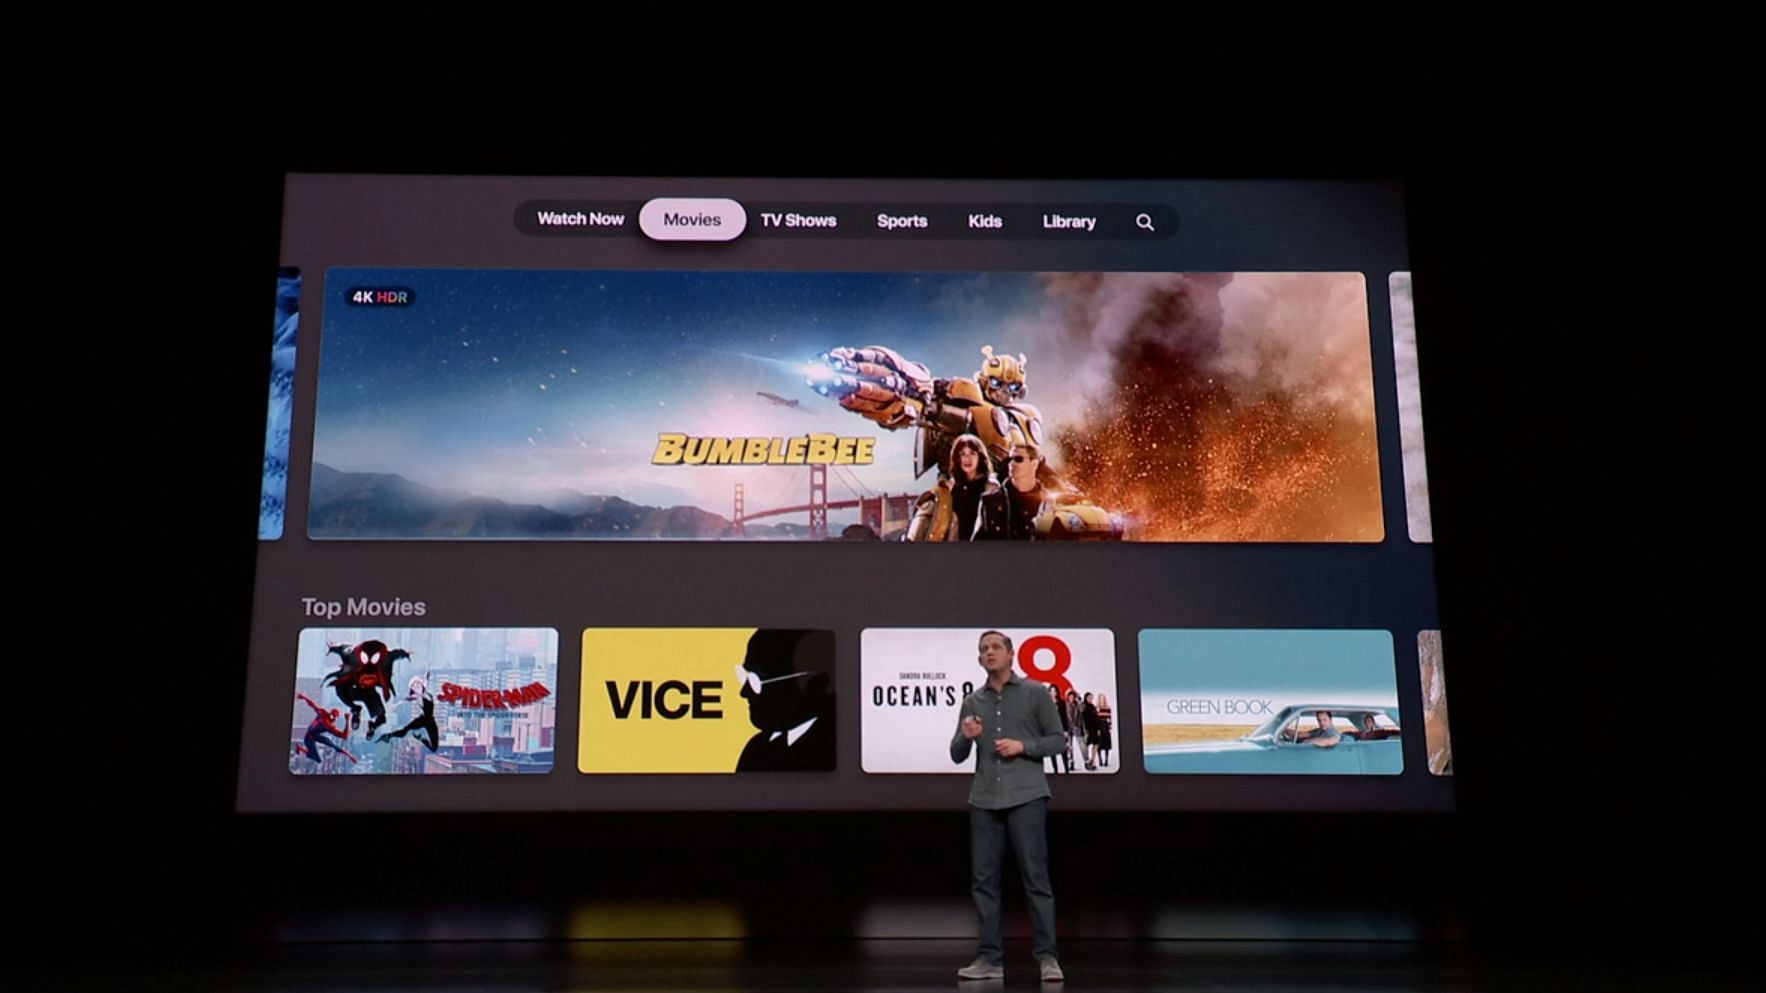 The Apple TV app receives a redesigned interface.